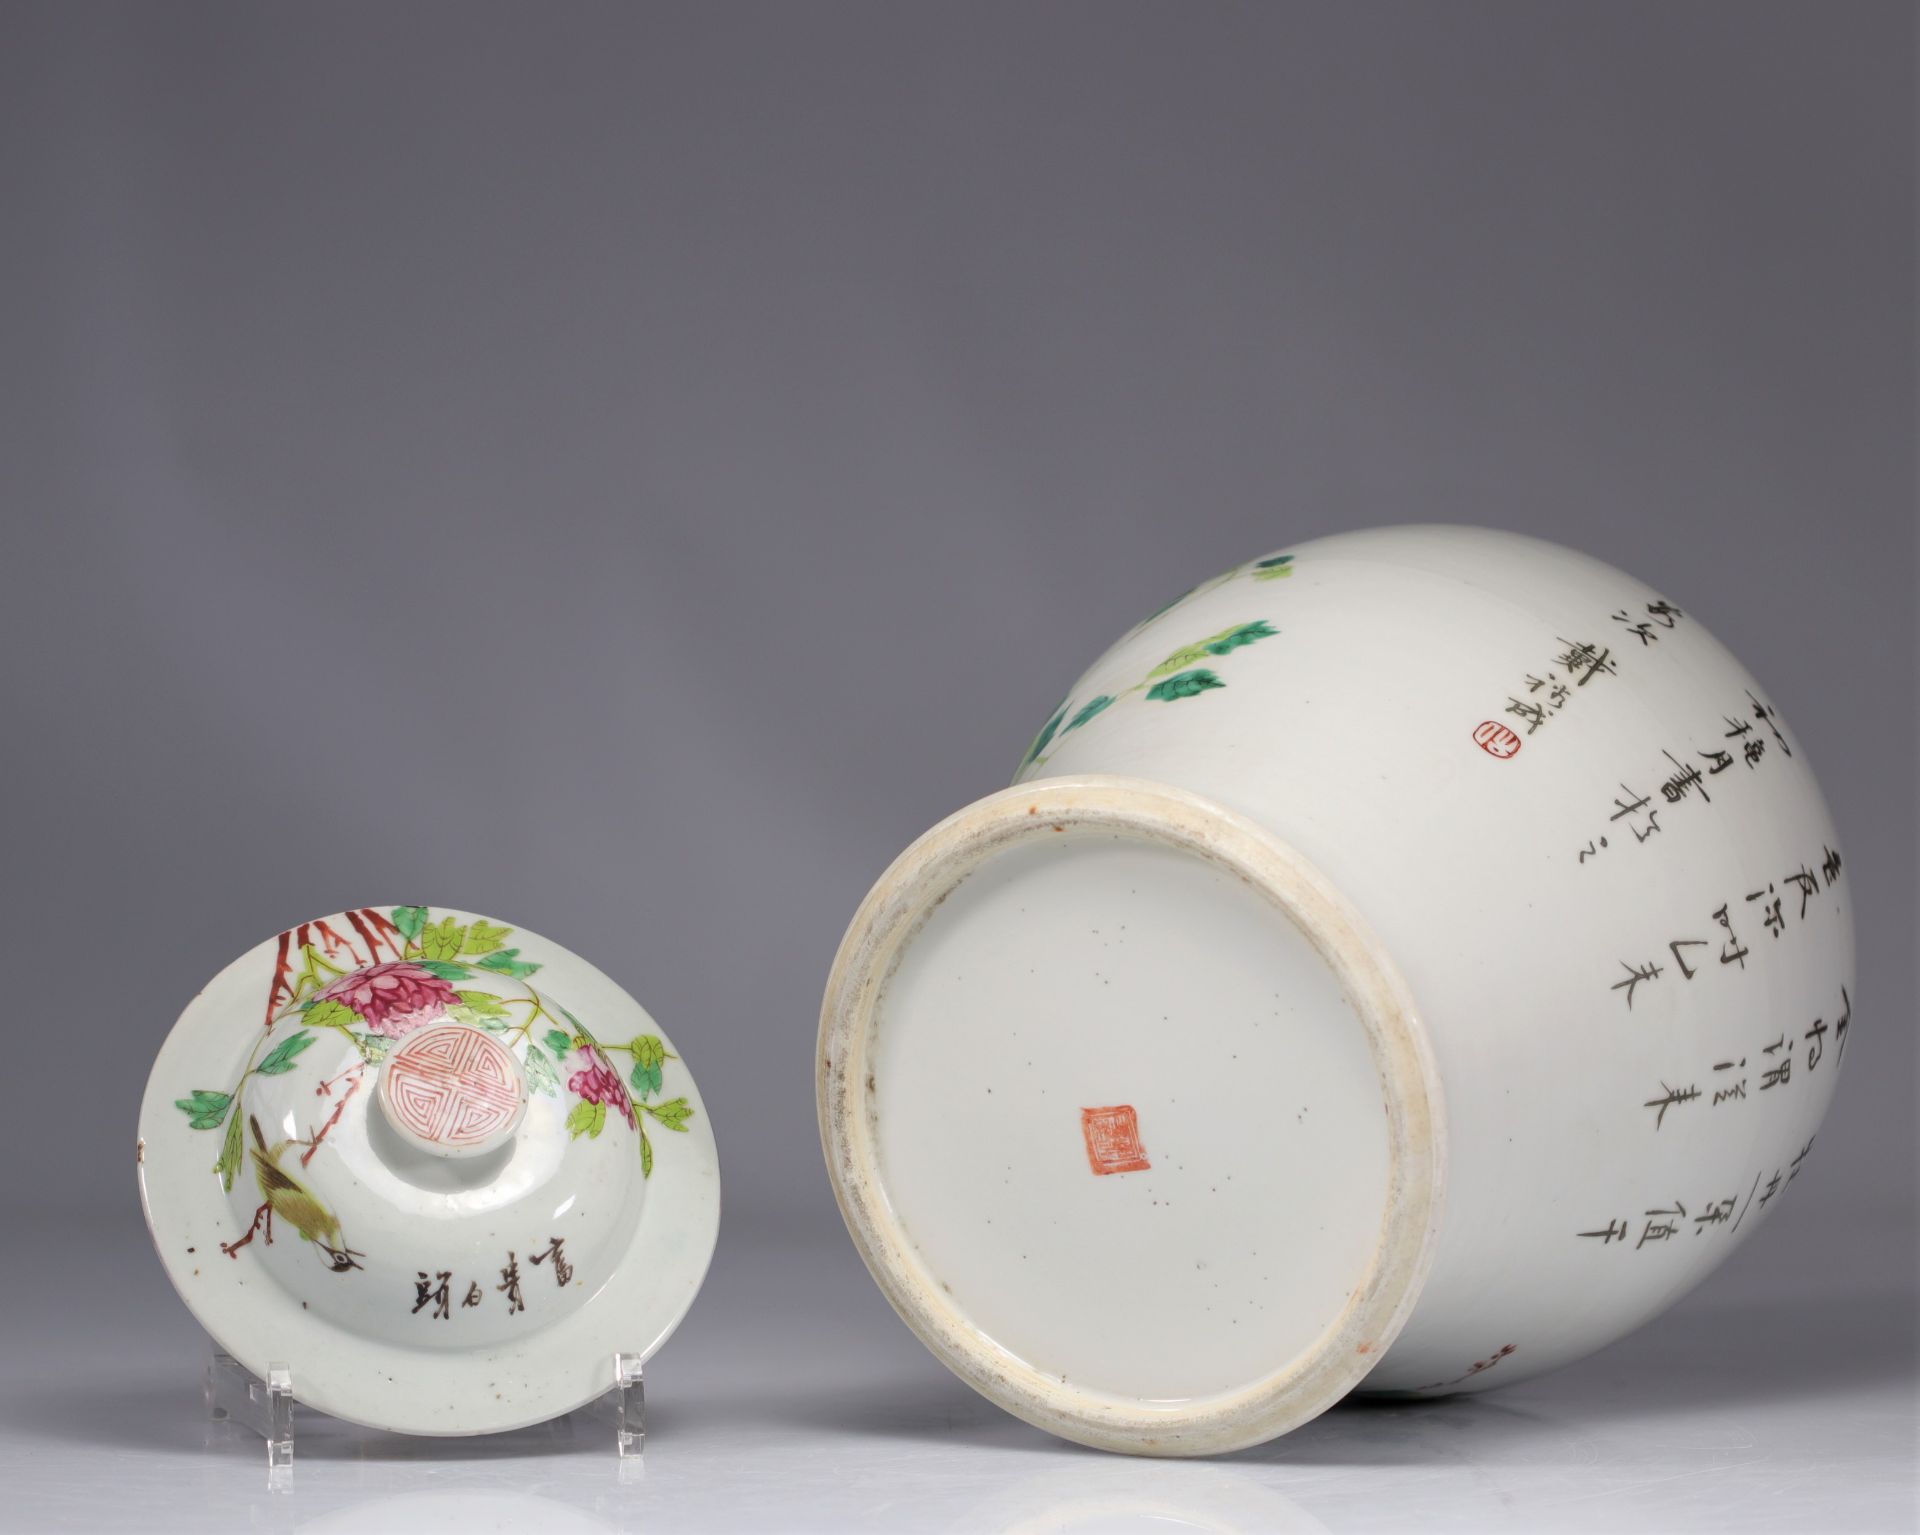 Qianjiang cai porcelain covered vase decorated with flowers and birds - Image 3 of 3